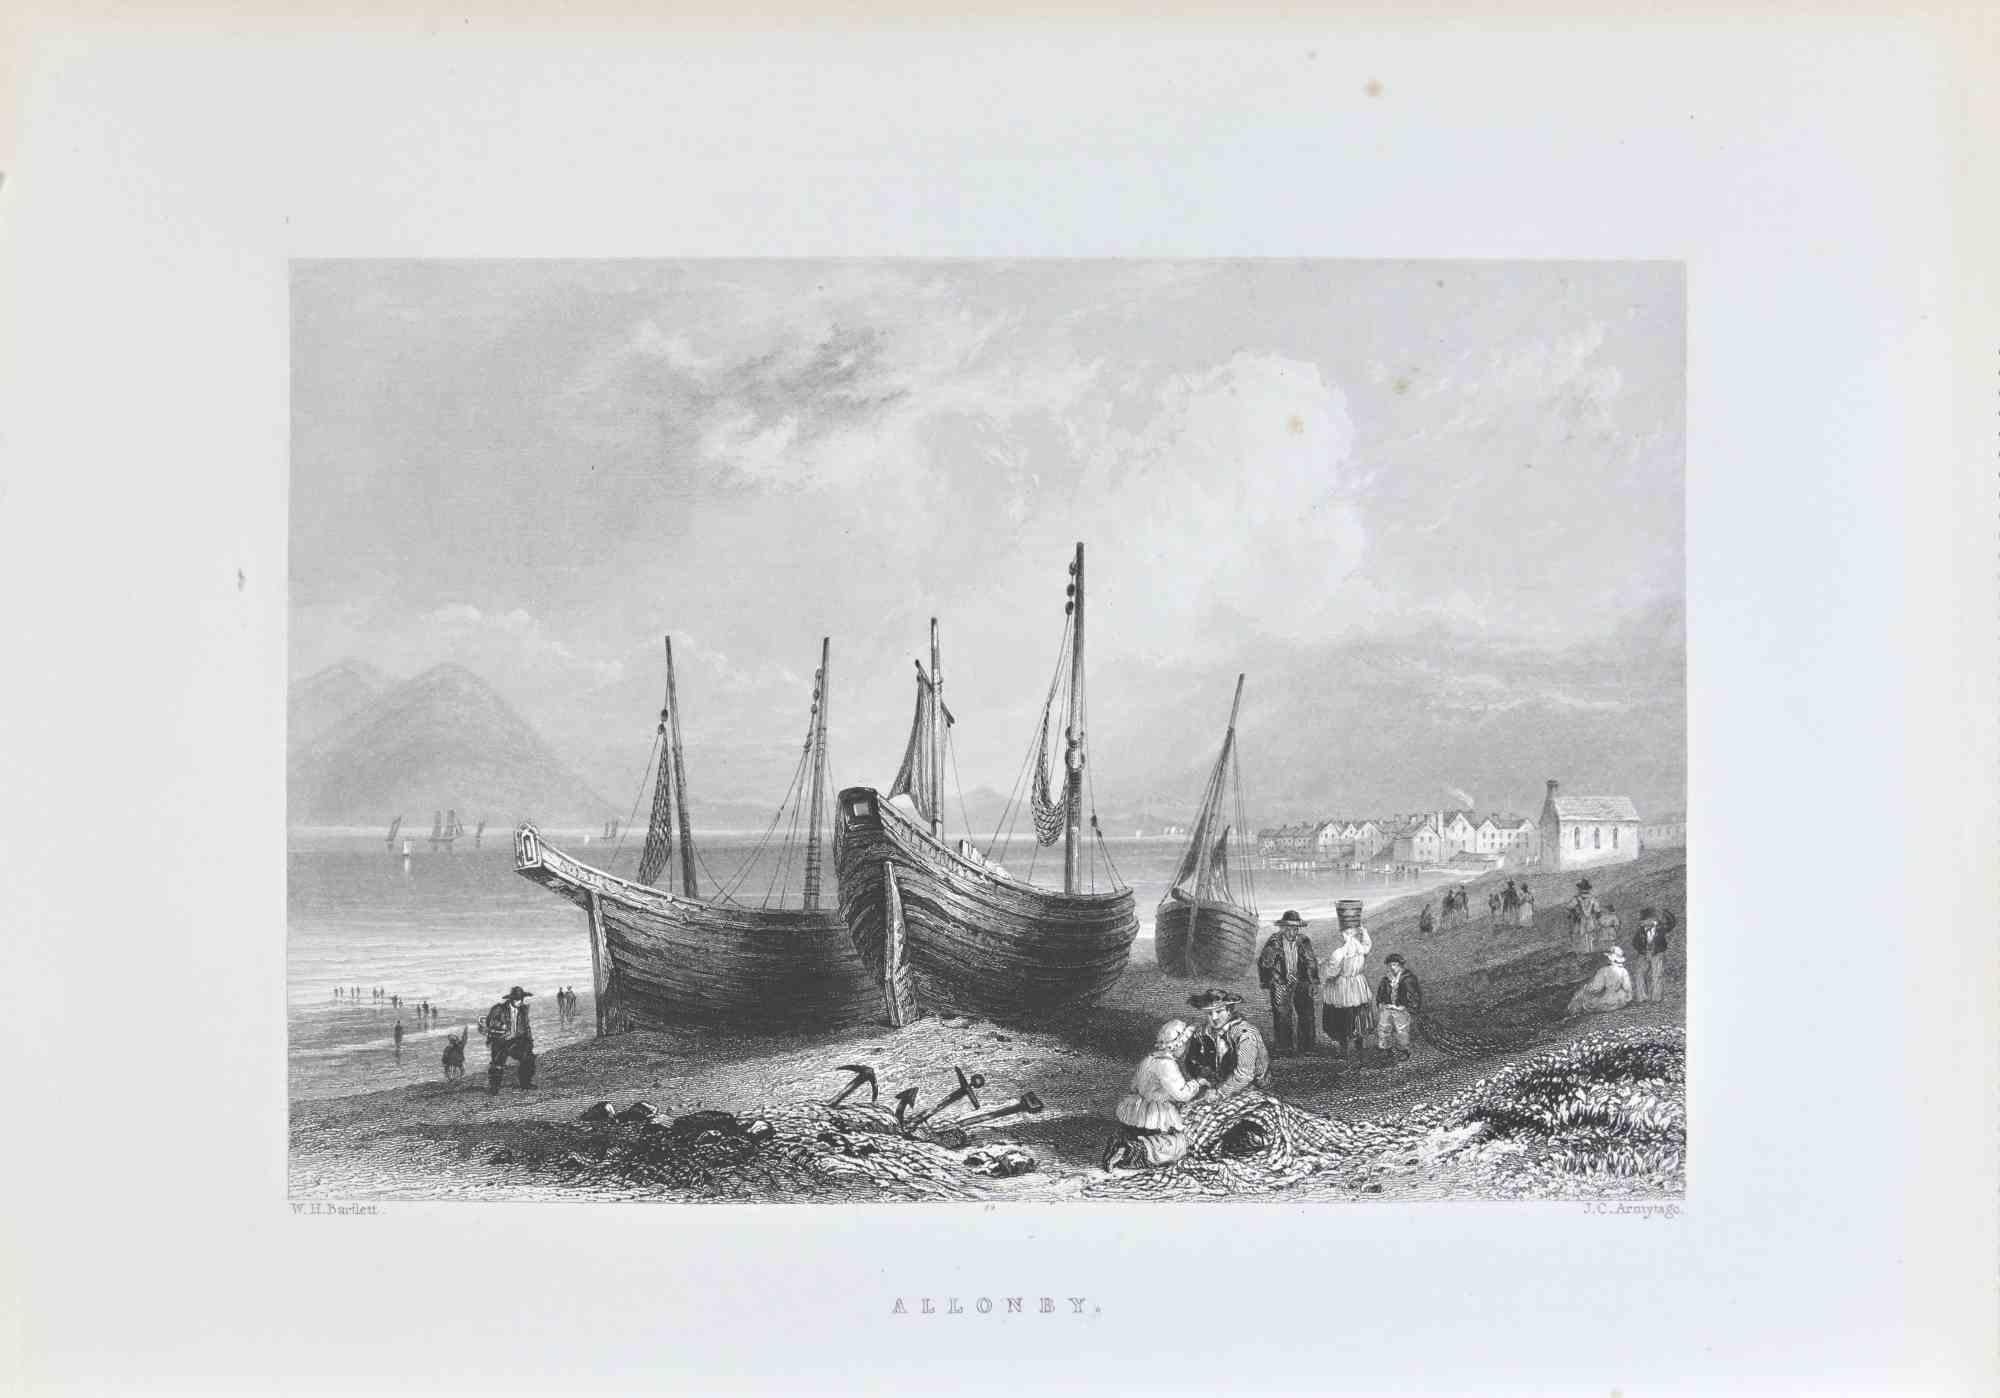 Allonby is an etching realized in 1845 by W. H.Bartlett.

Signed on the plate. 

Titled on the lower center.

Good conditions with slight foxing.

The artwork is beautifully realized in a well-balanced composition through short, deft strokes.